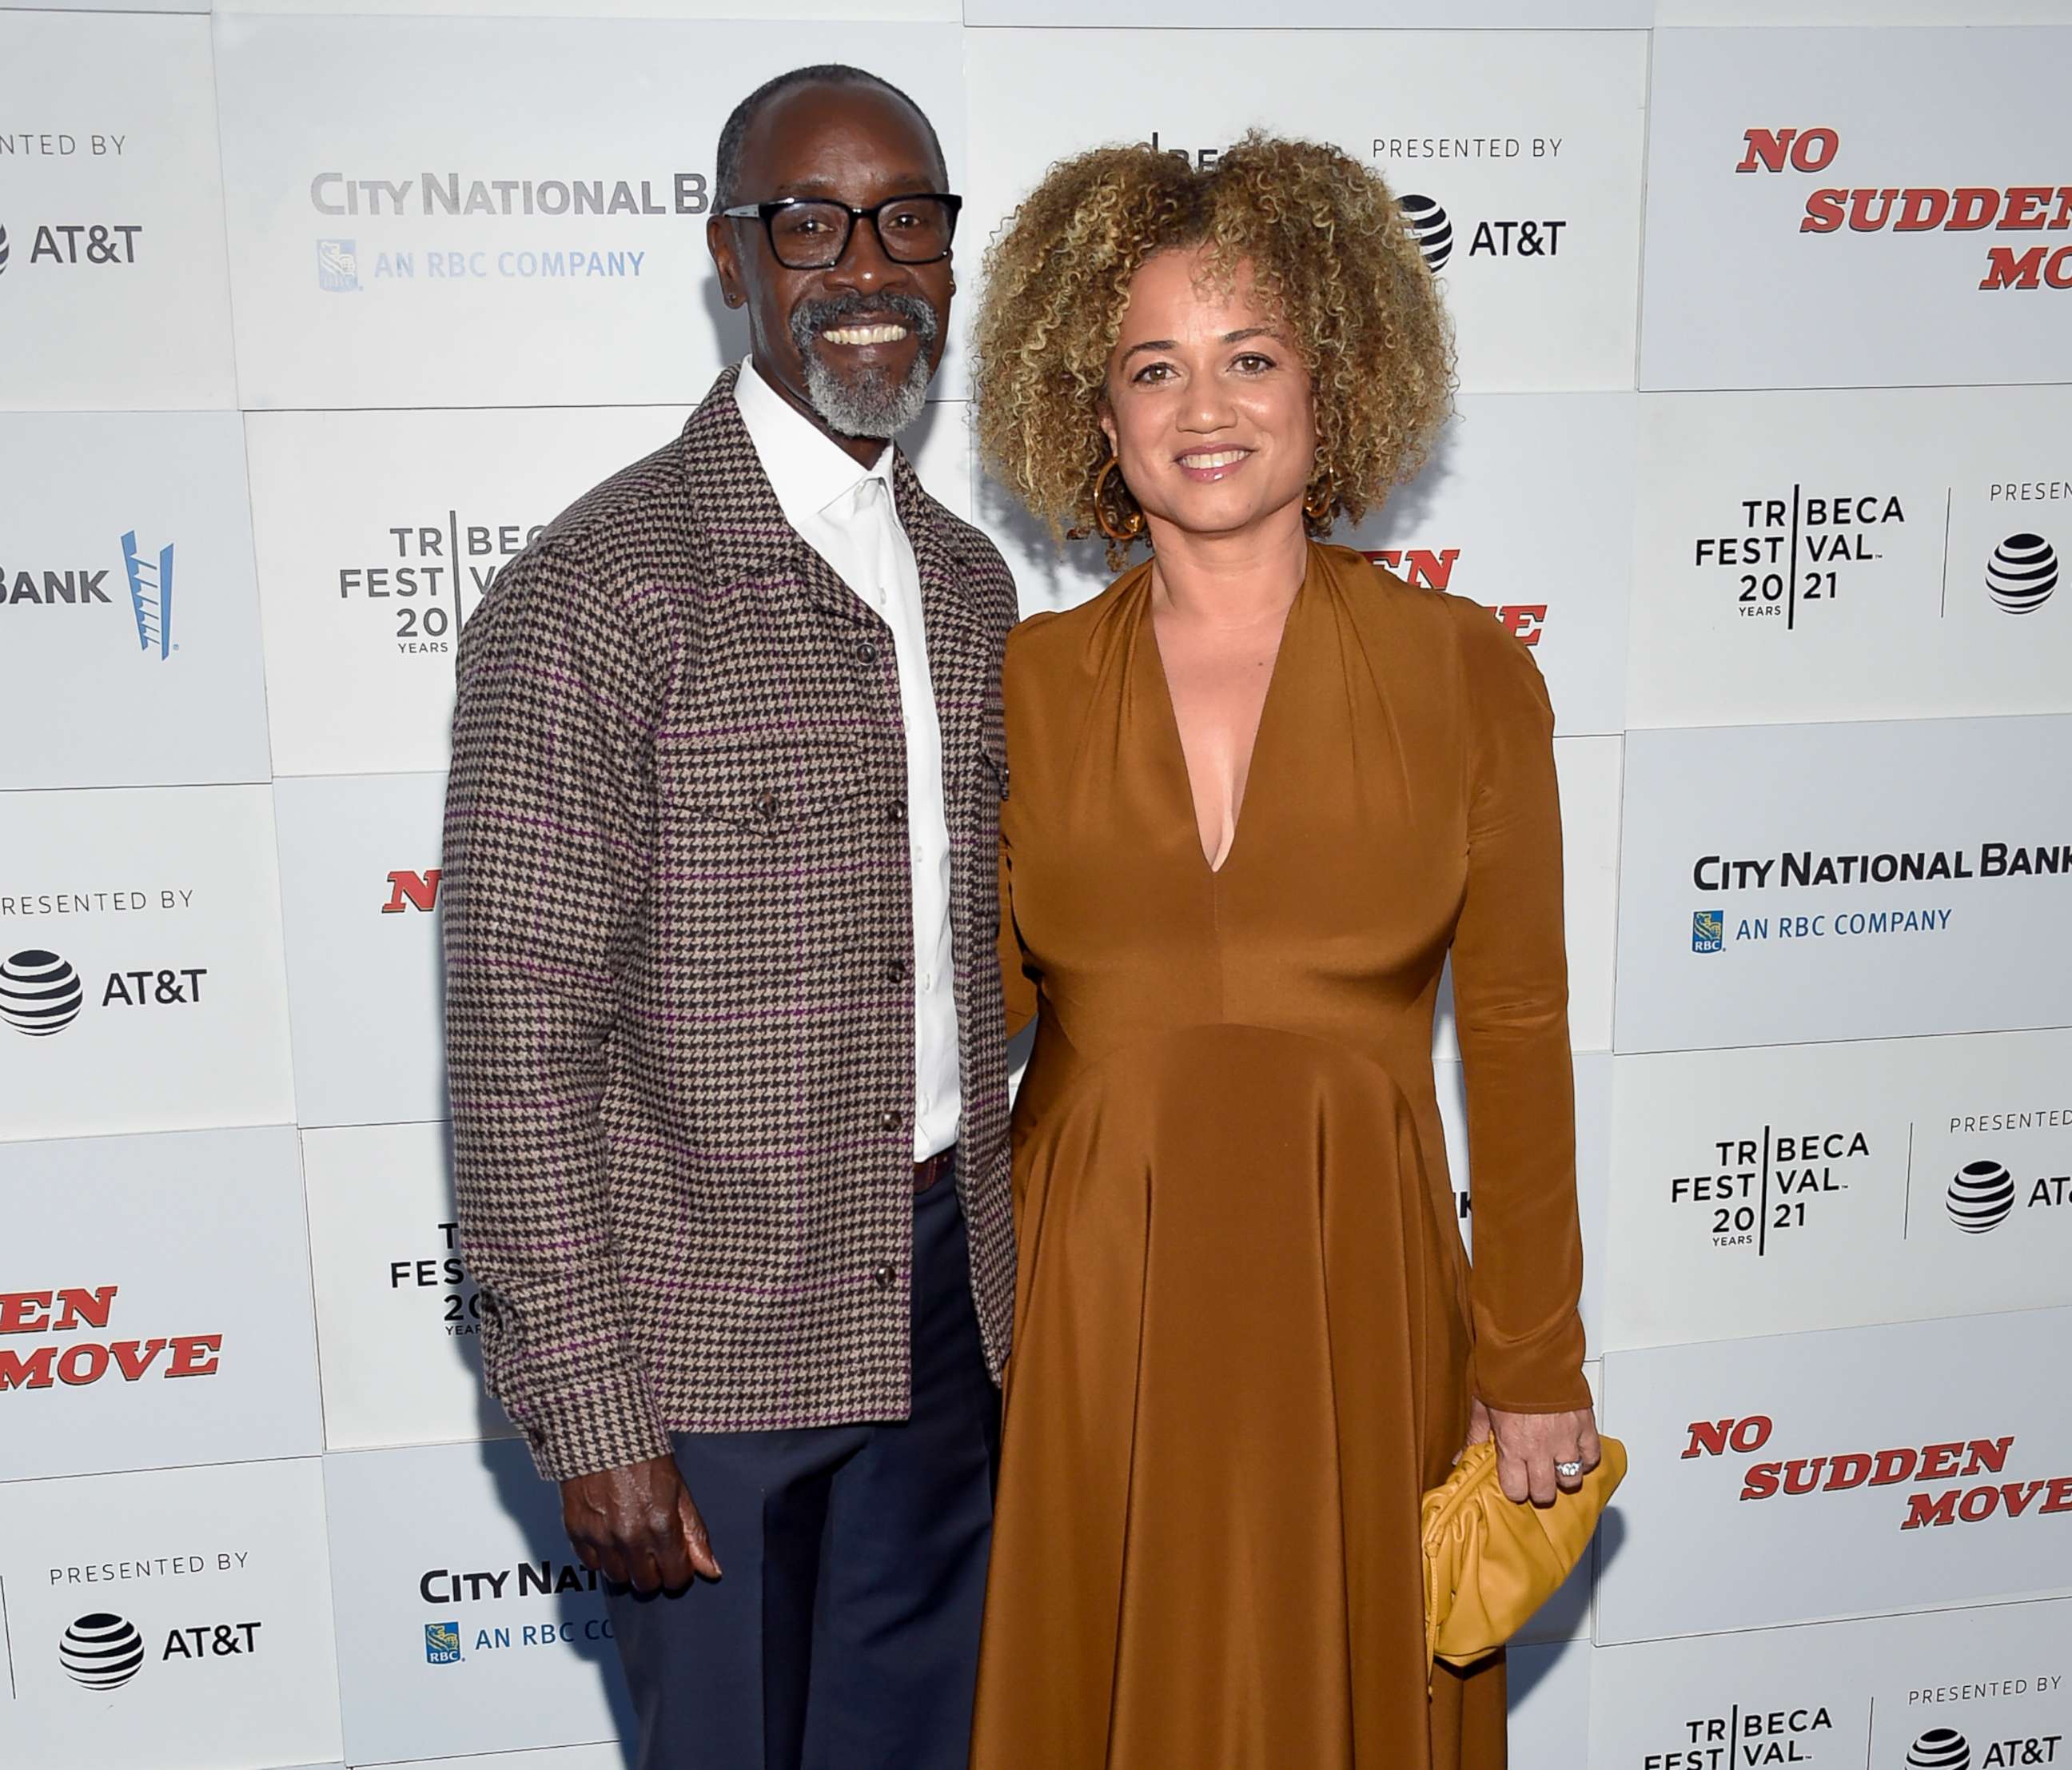 PHOTO: Actor Don Cheadle and partner Bridgid Coulter attend an event in New York City, June 18, 2021.